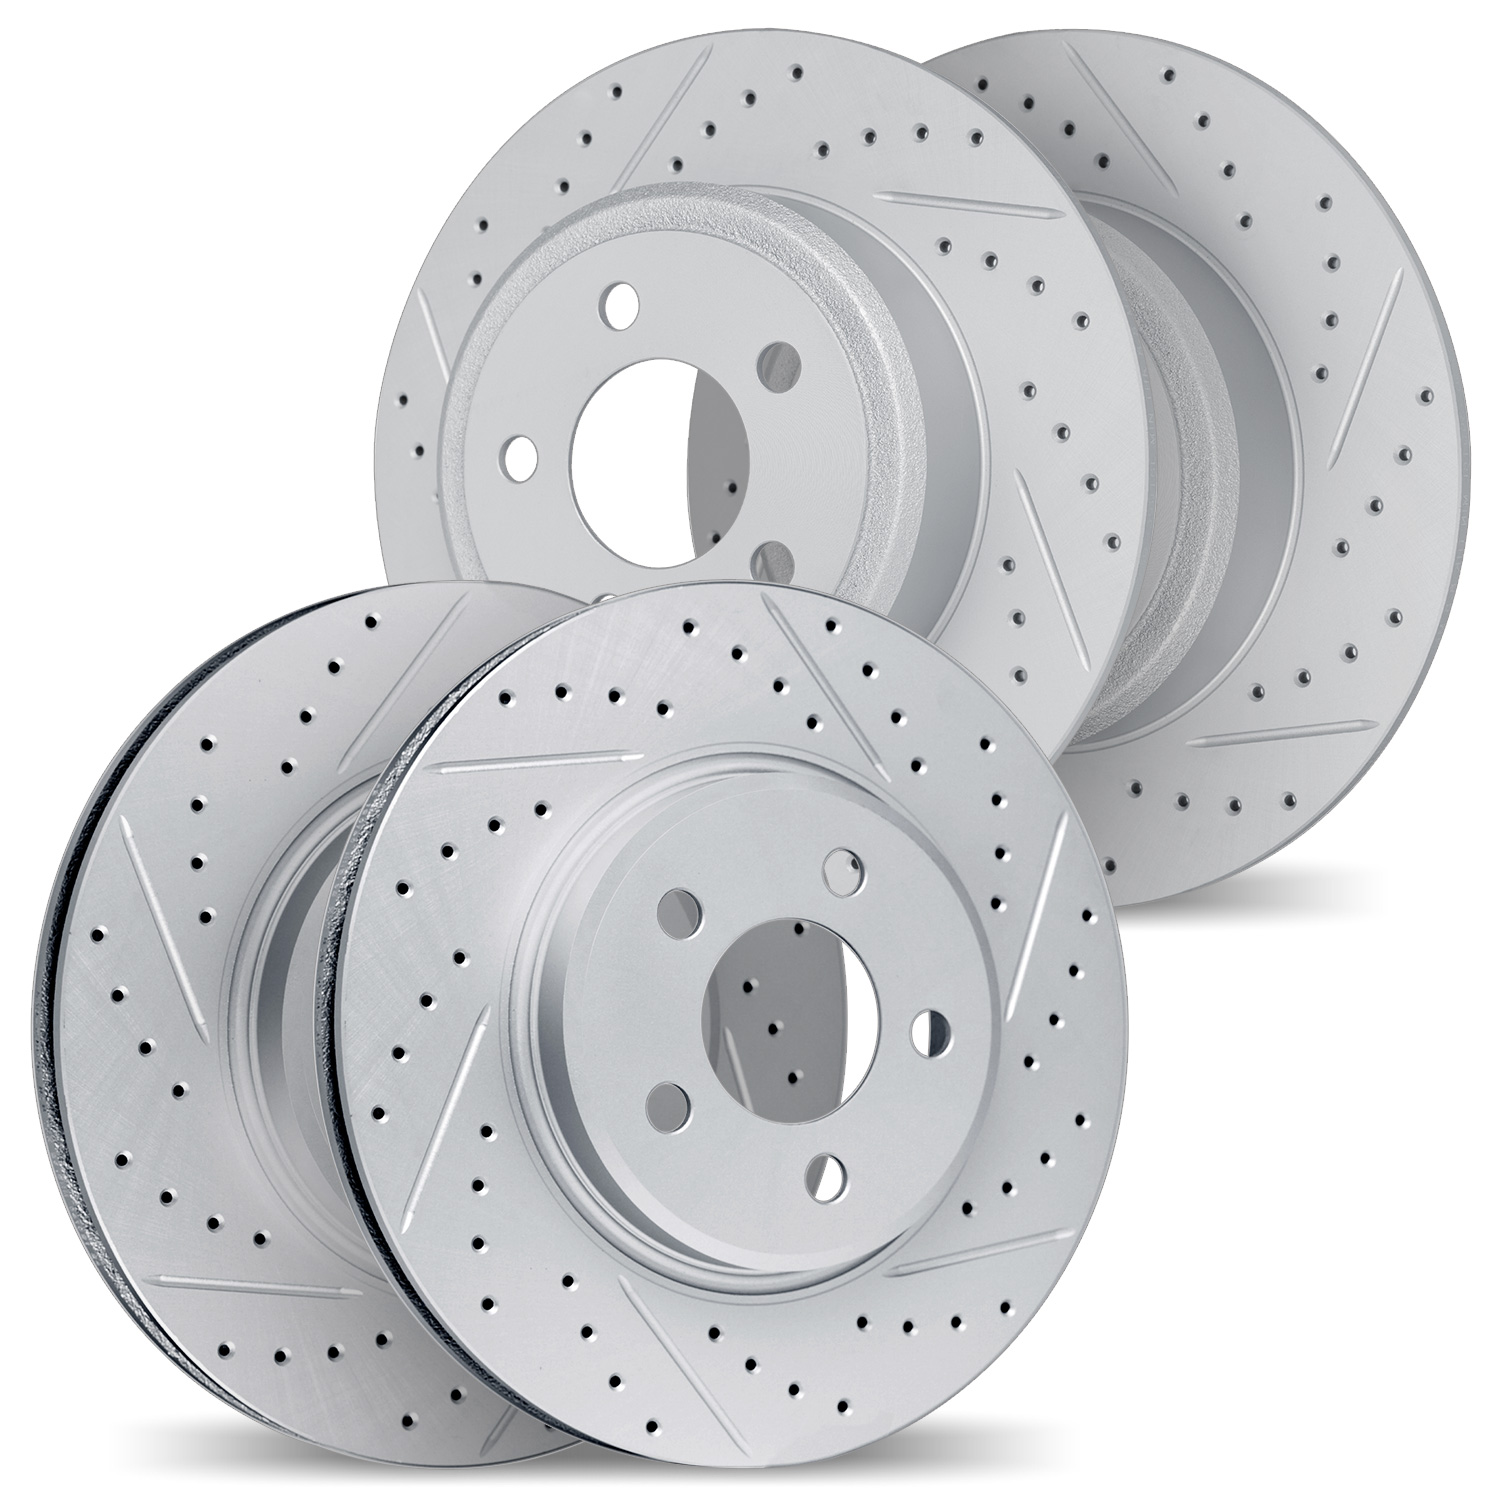 2004-54149 Geoperformance Drilled/Slotted Brake Rotors, 1994-2004 Ford/Lincoln/Mercury/Mazda, Position: Front and Rear